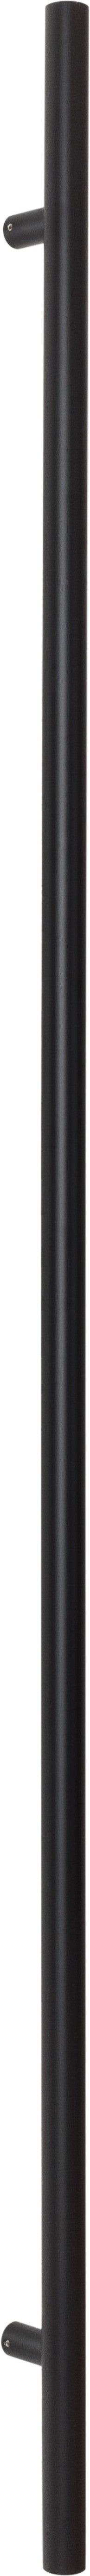 Sure-Loc 72" Round Long Door Pull, Single-Sided in Flat Black finish